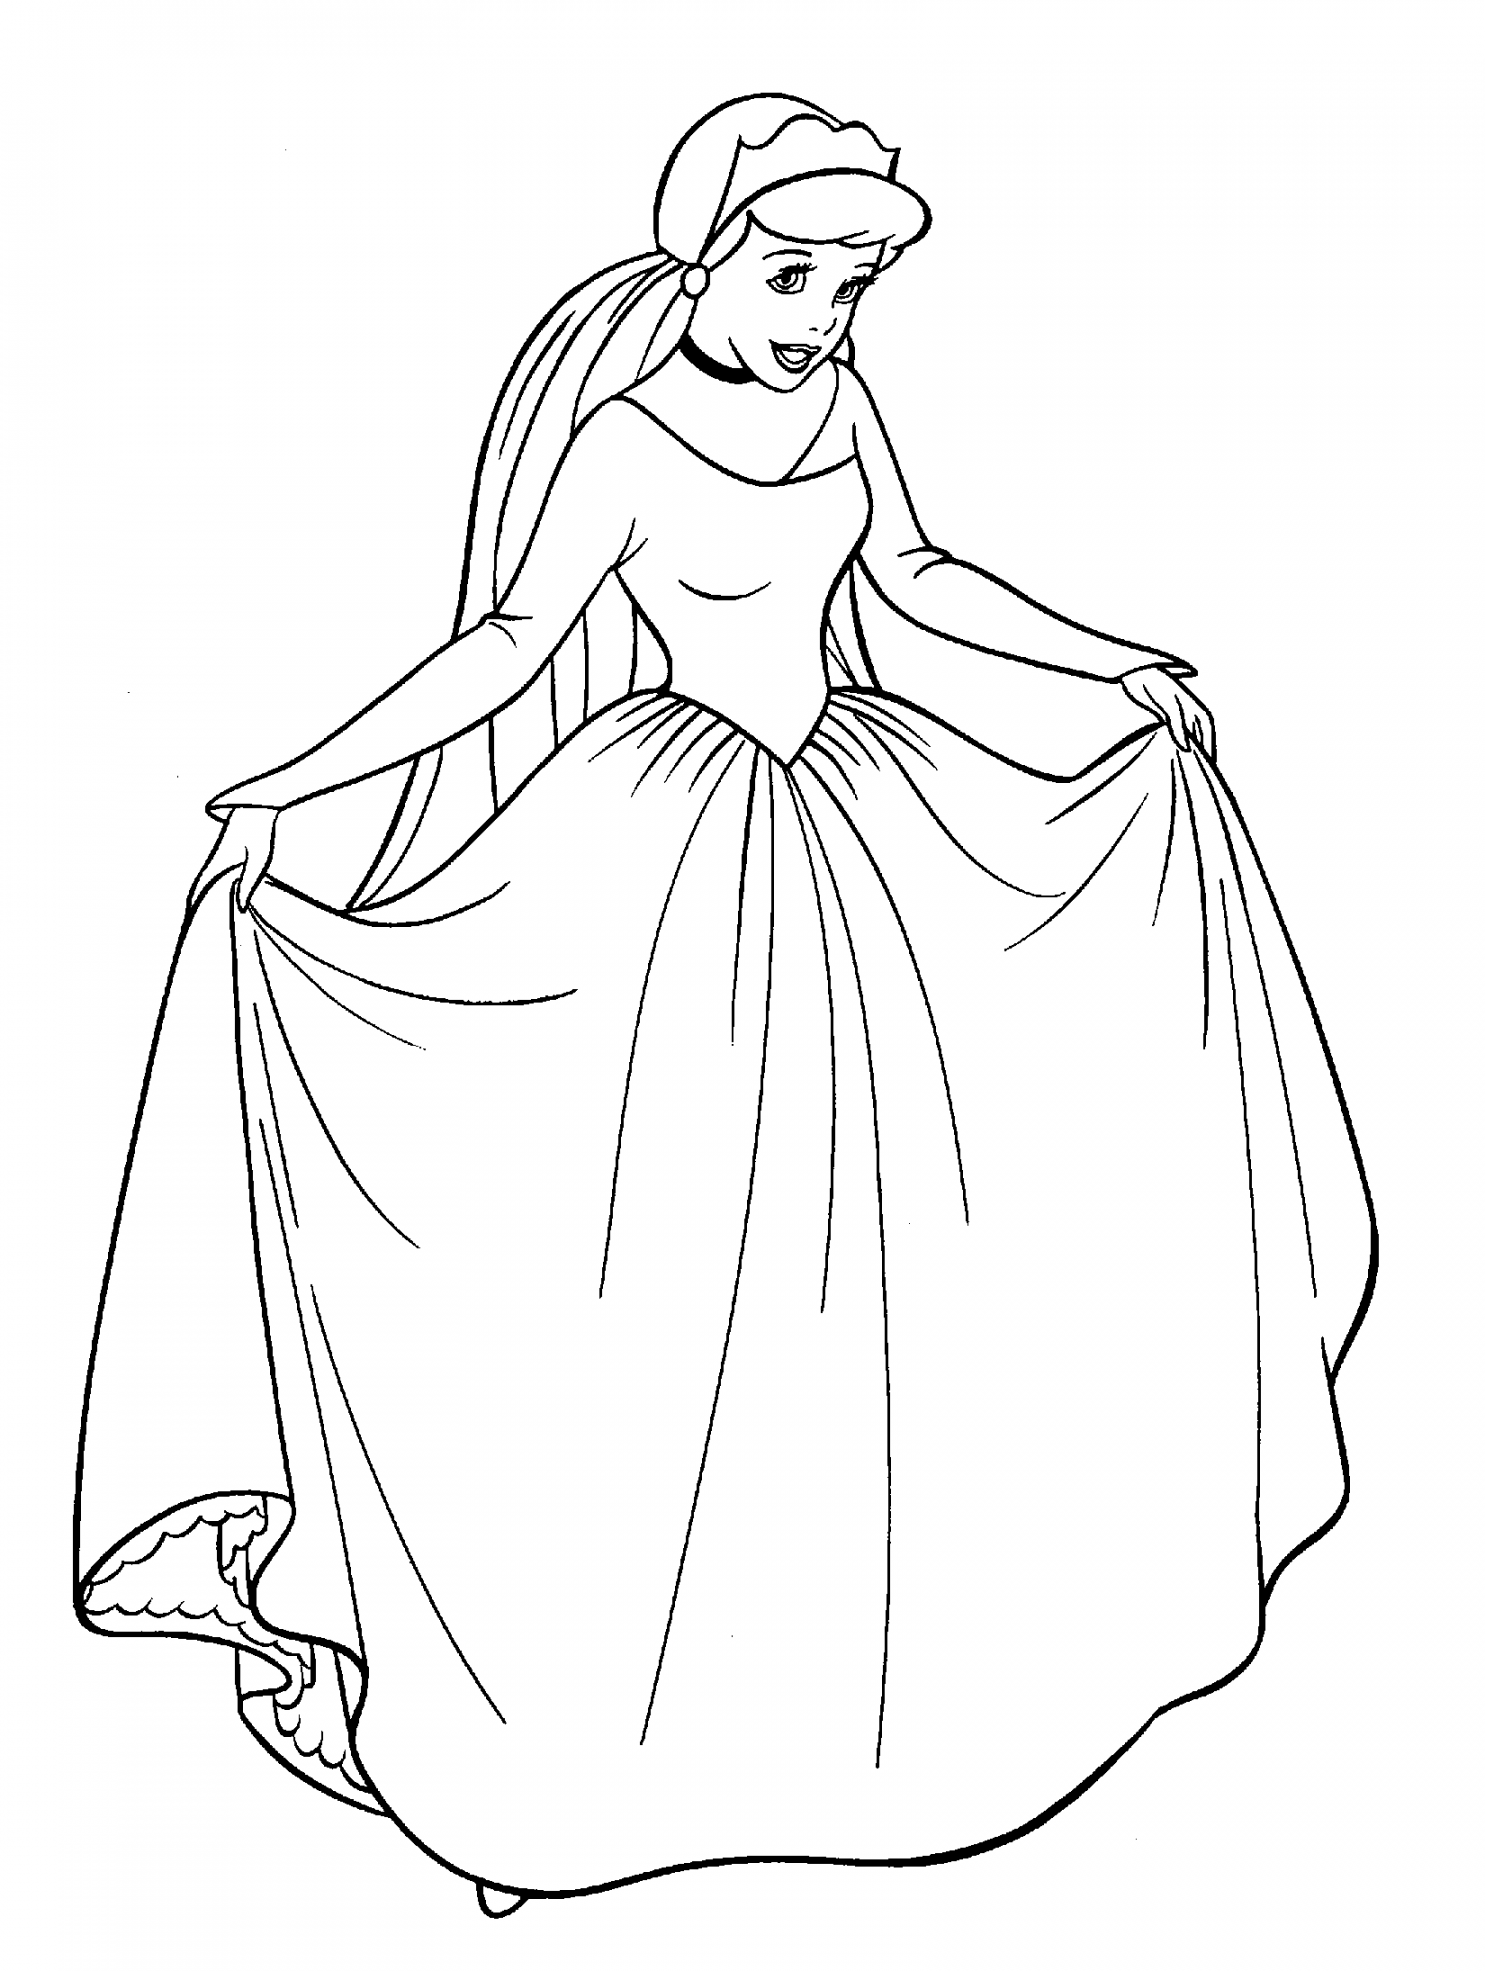 Free Printable Cinderella Coloring Pages For Kids - FREE Printables - Free Printable Disney Princess Coloring Pages